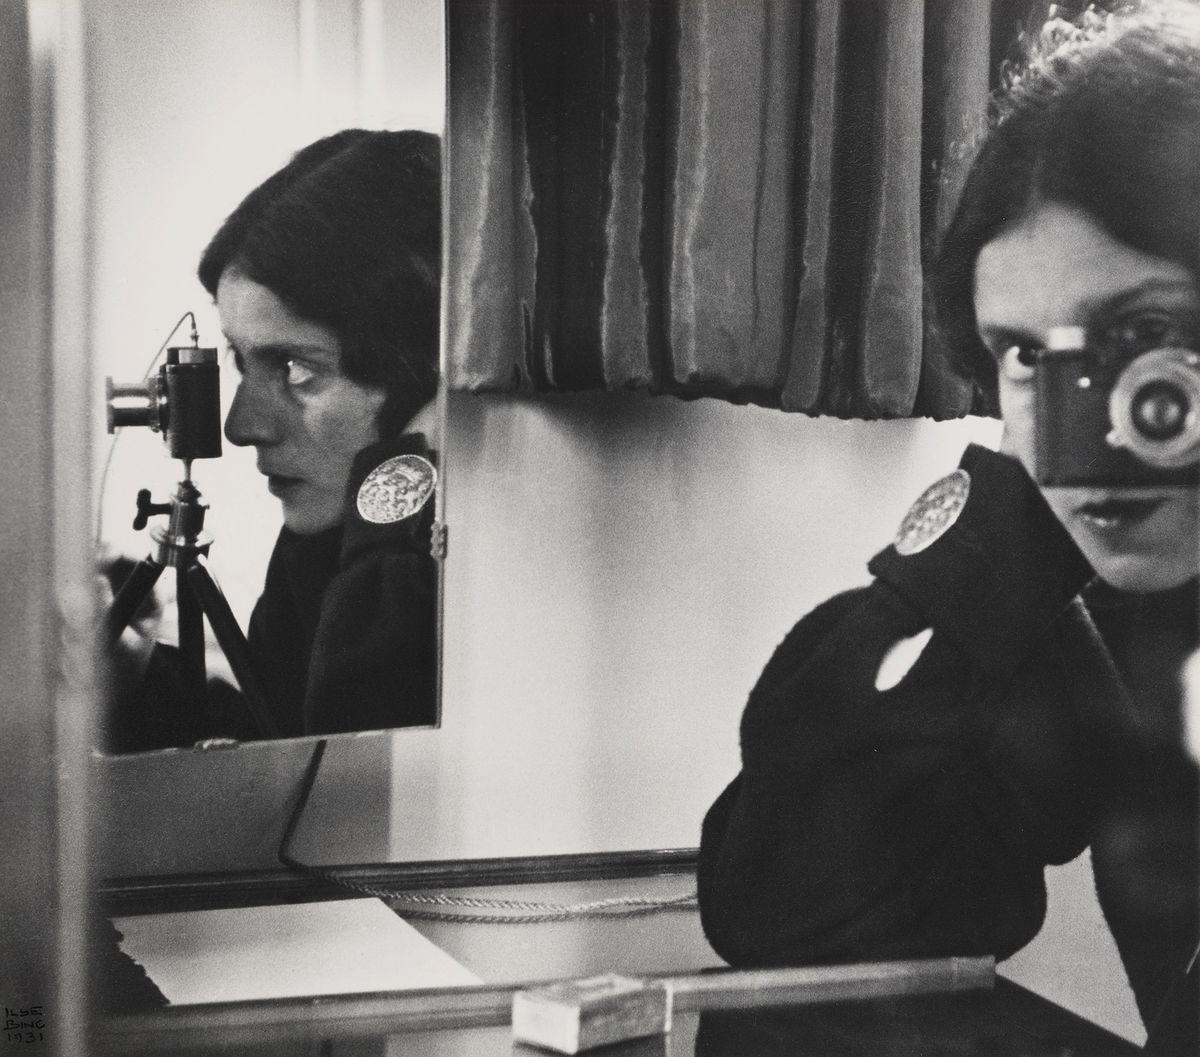 Ilse Bing, Self-Portrait with Leica 1931 Collection of Michael Mattis and Judith Hochberg